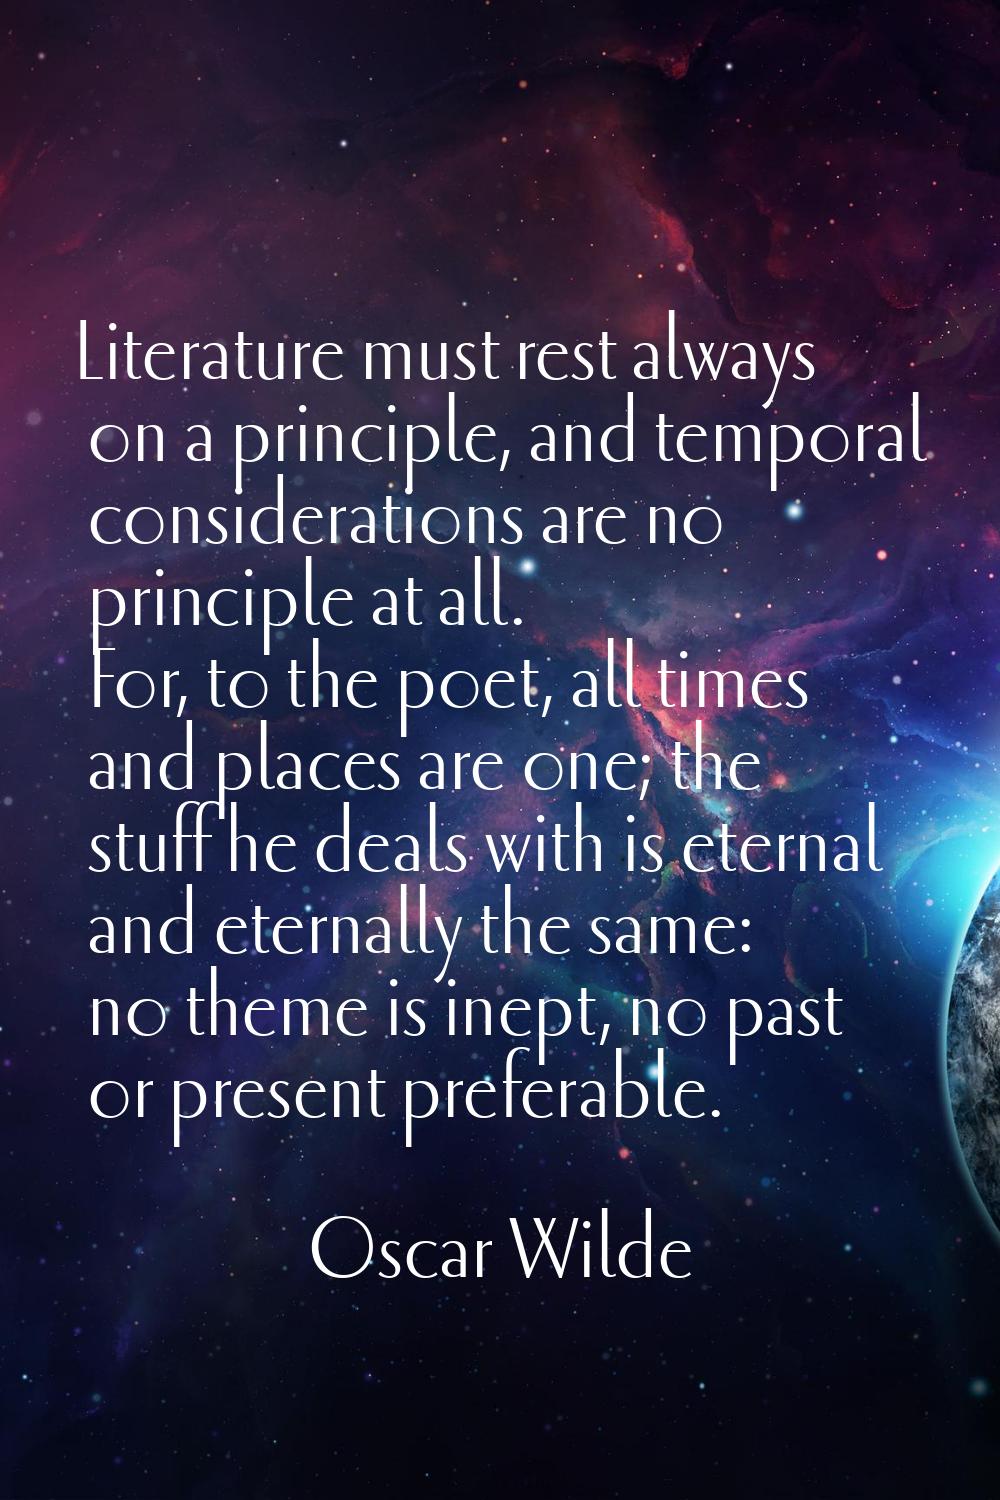 Literature must rest always on a principle, and temporal considerations are no principle at all. Fo